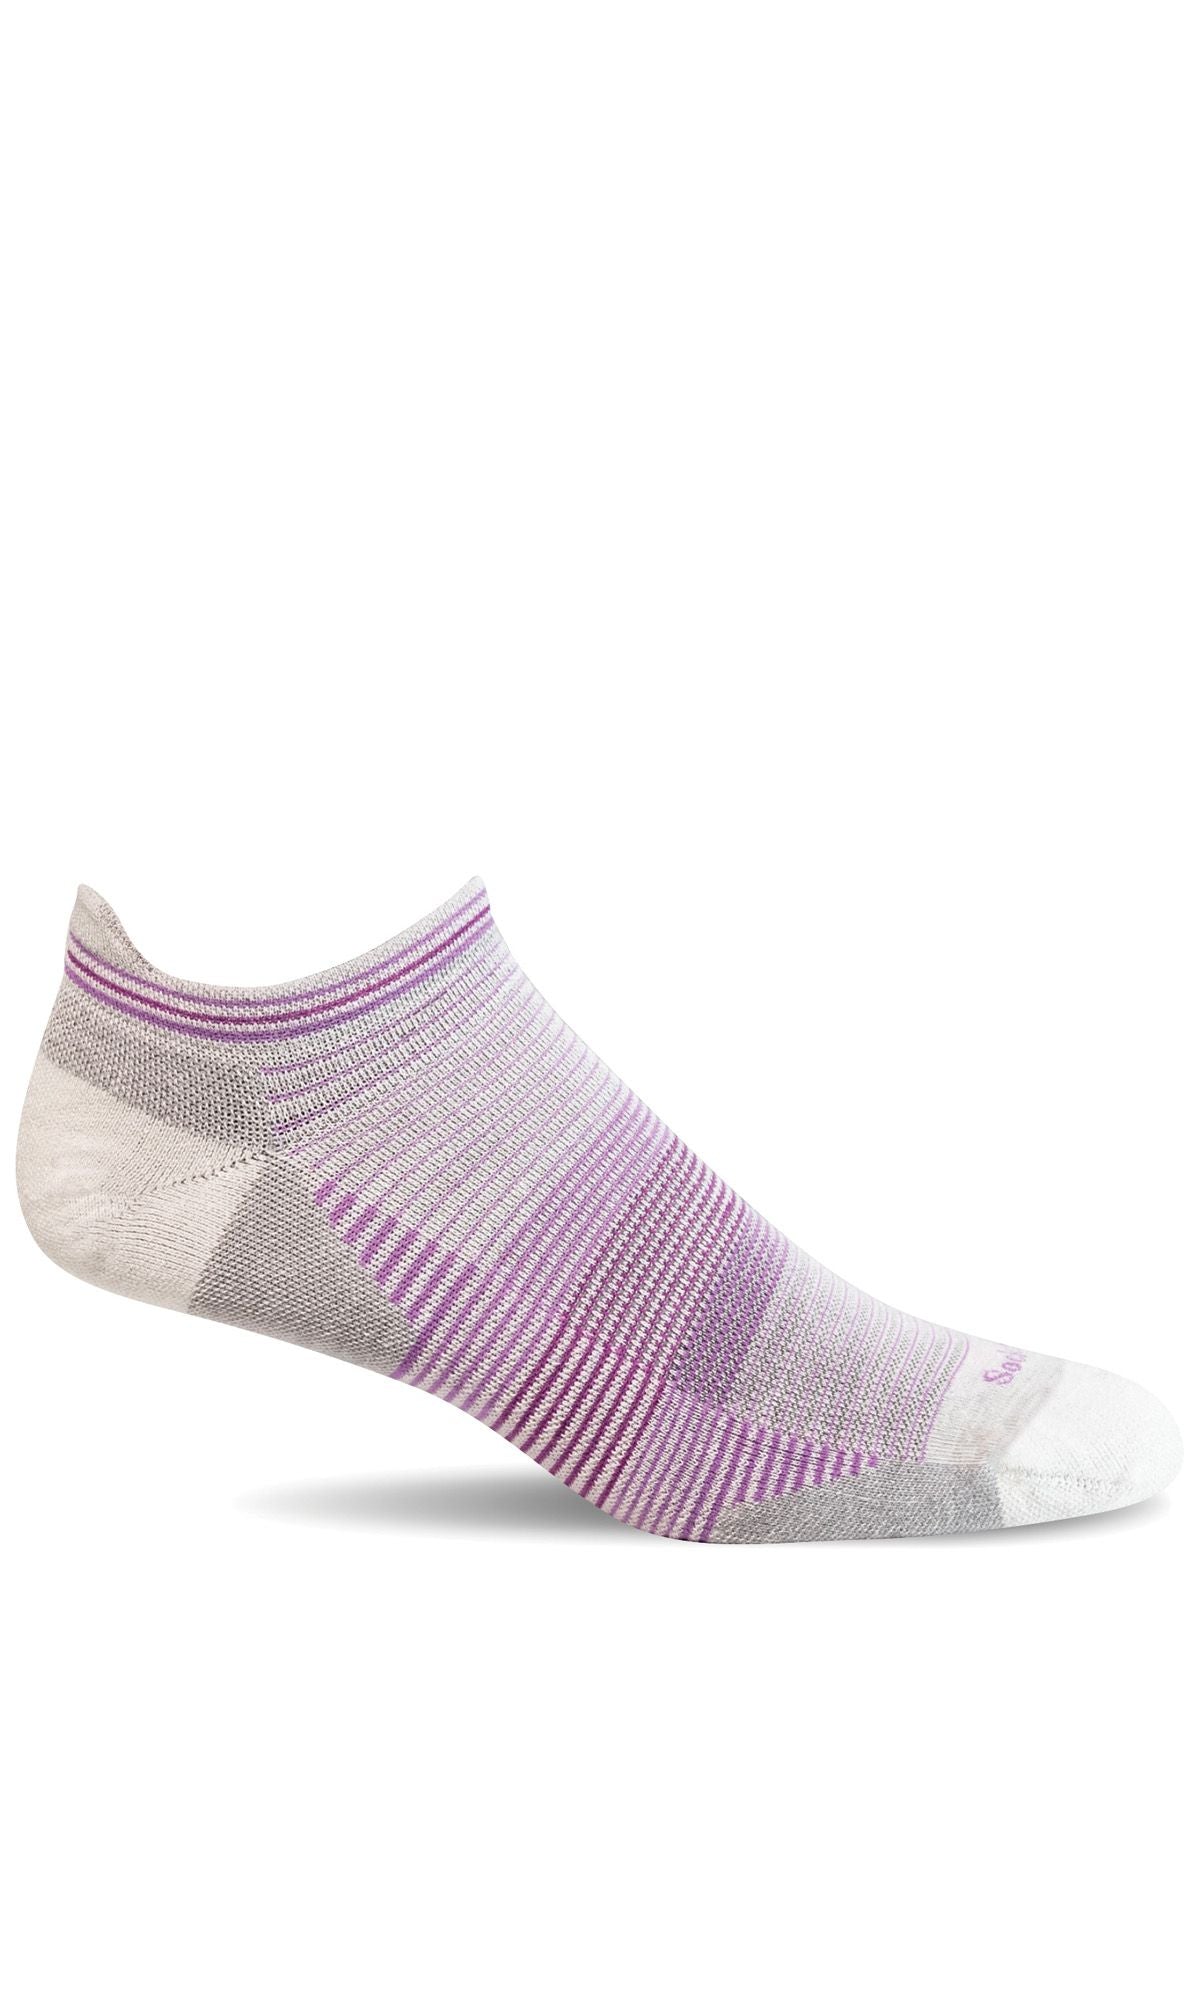 Sockwell Cadence Micro Moderate Compression Socks (Women's)